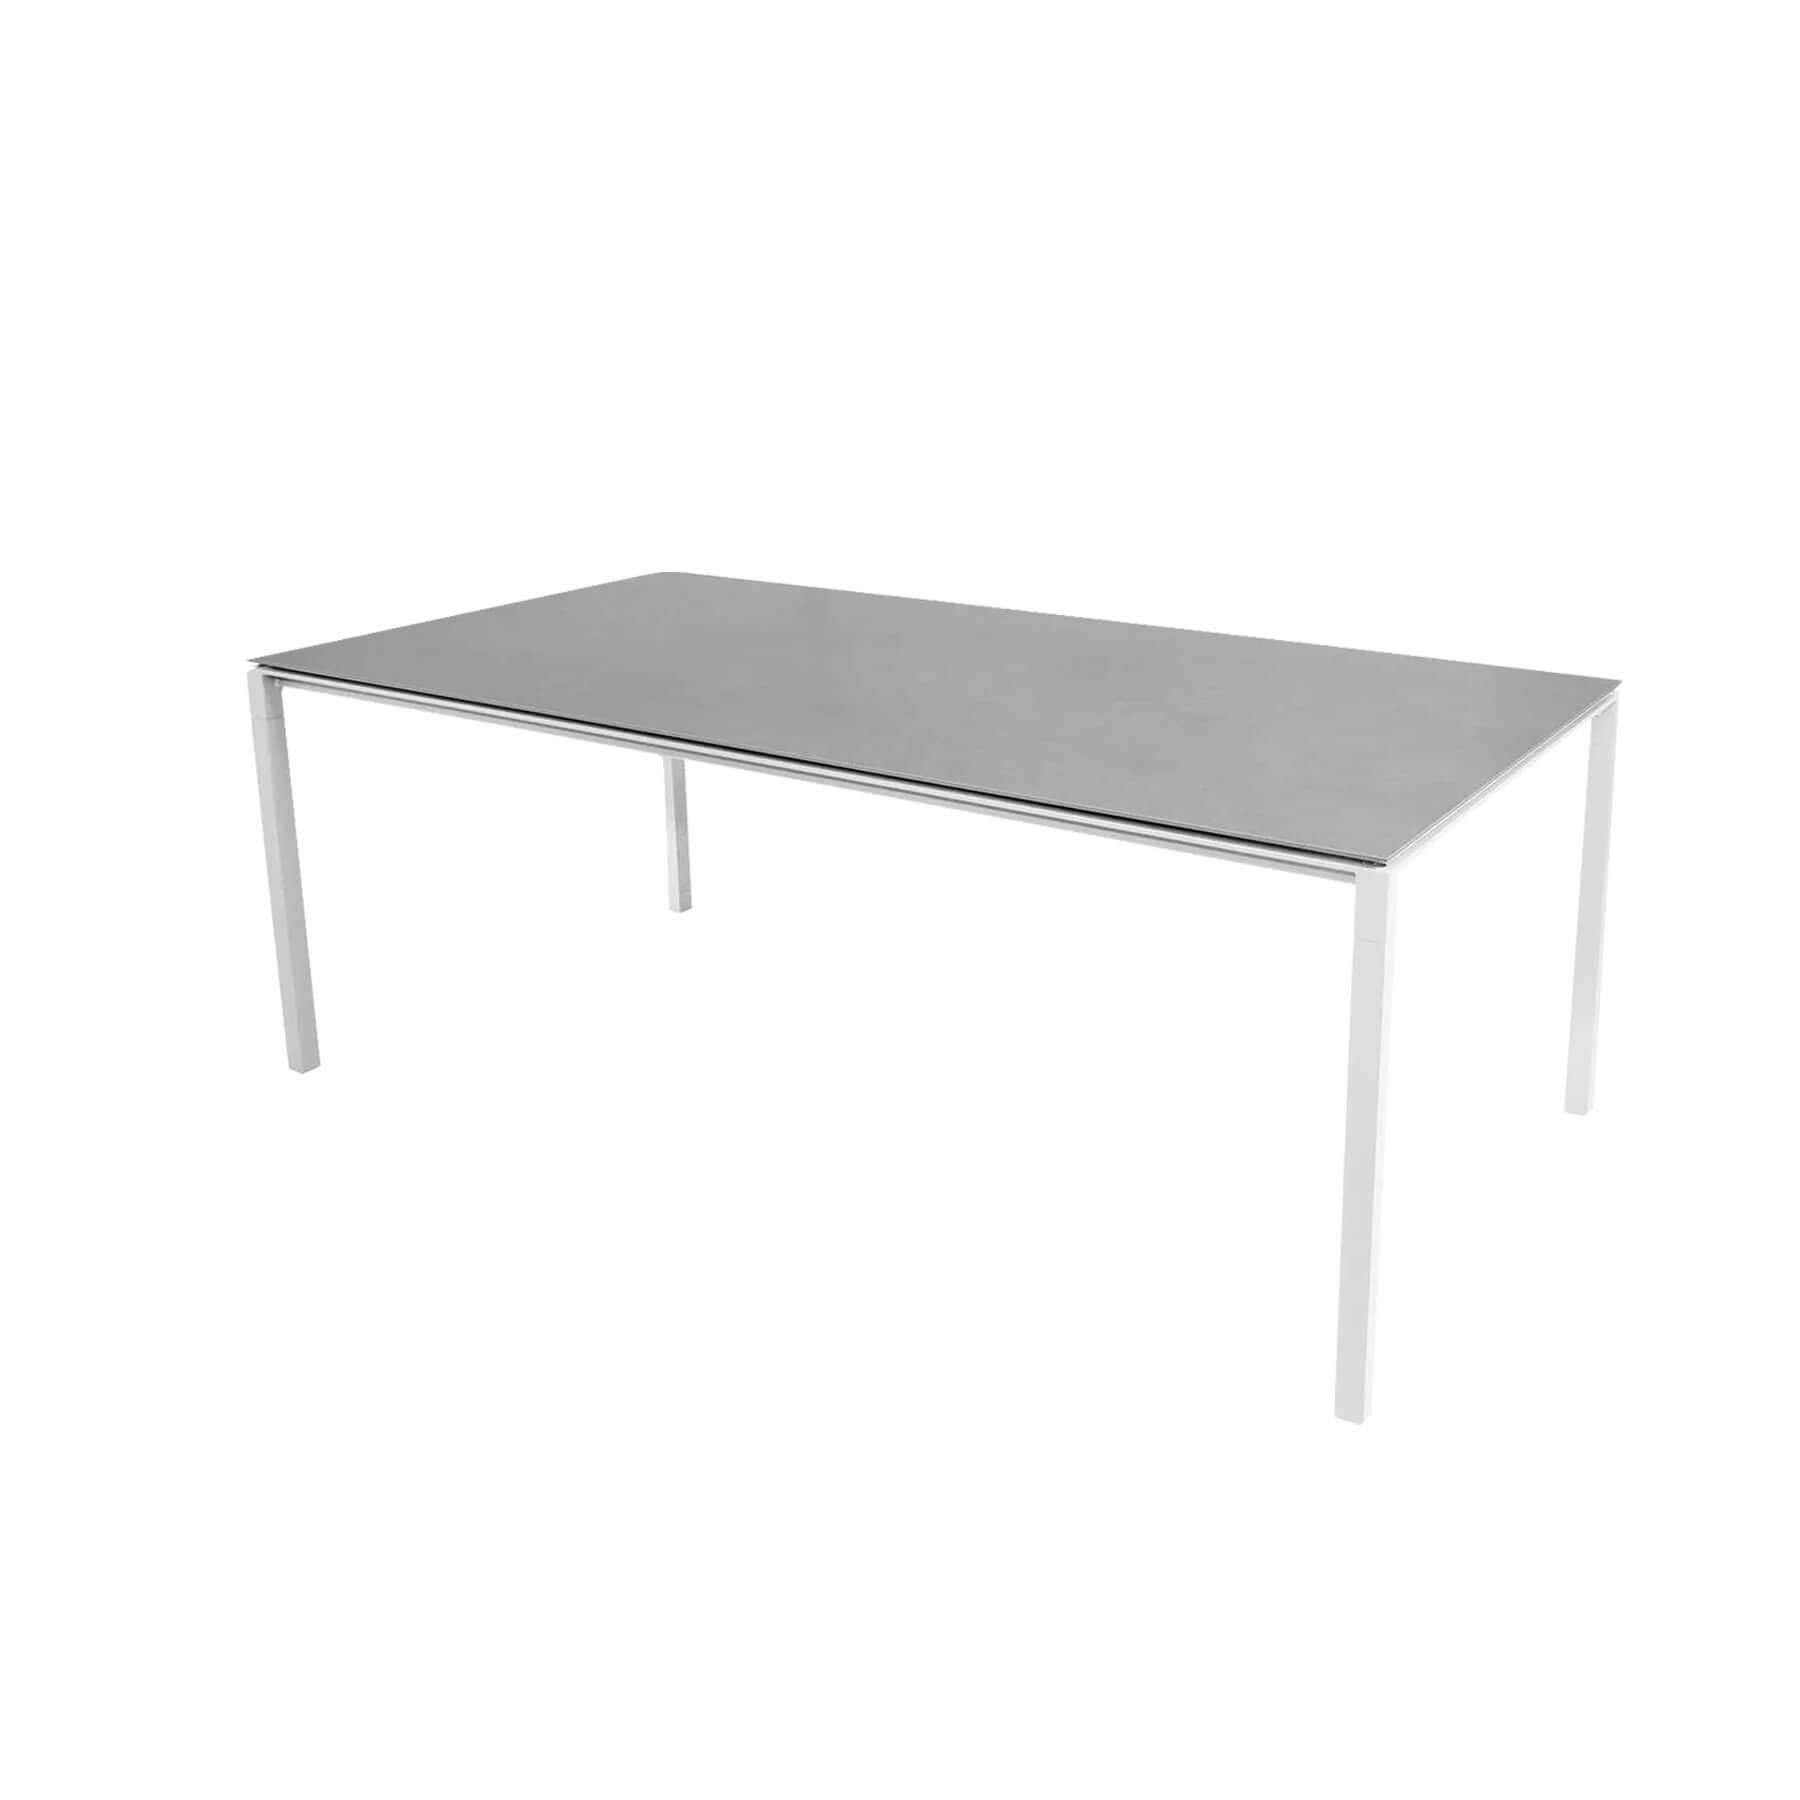 Caneline Pure Outdoor Dining Table Large Ceramic Concrete Grey Top White Legs